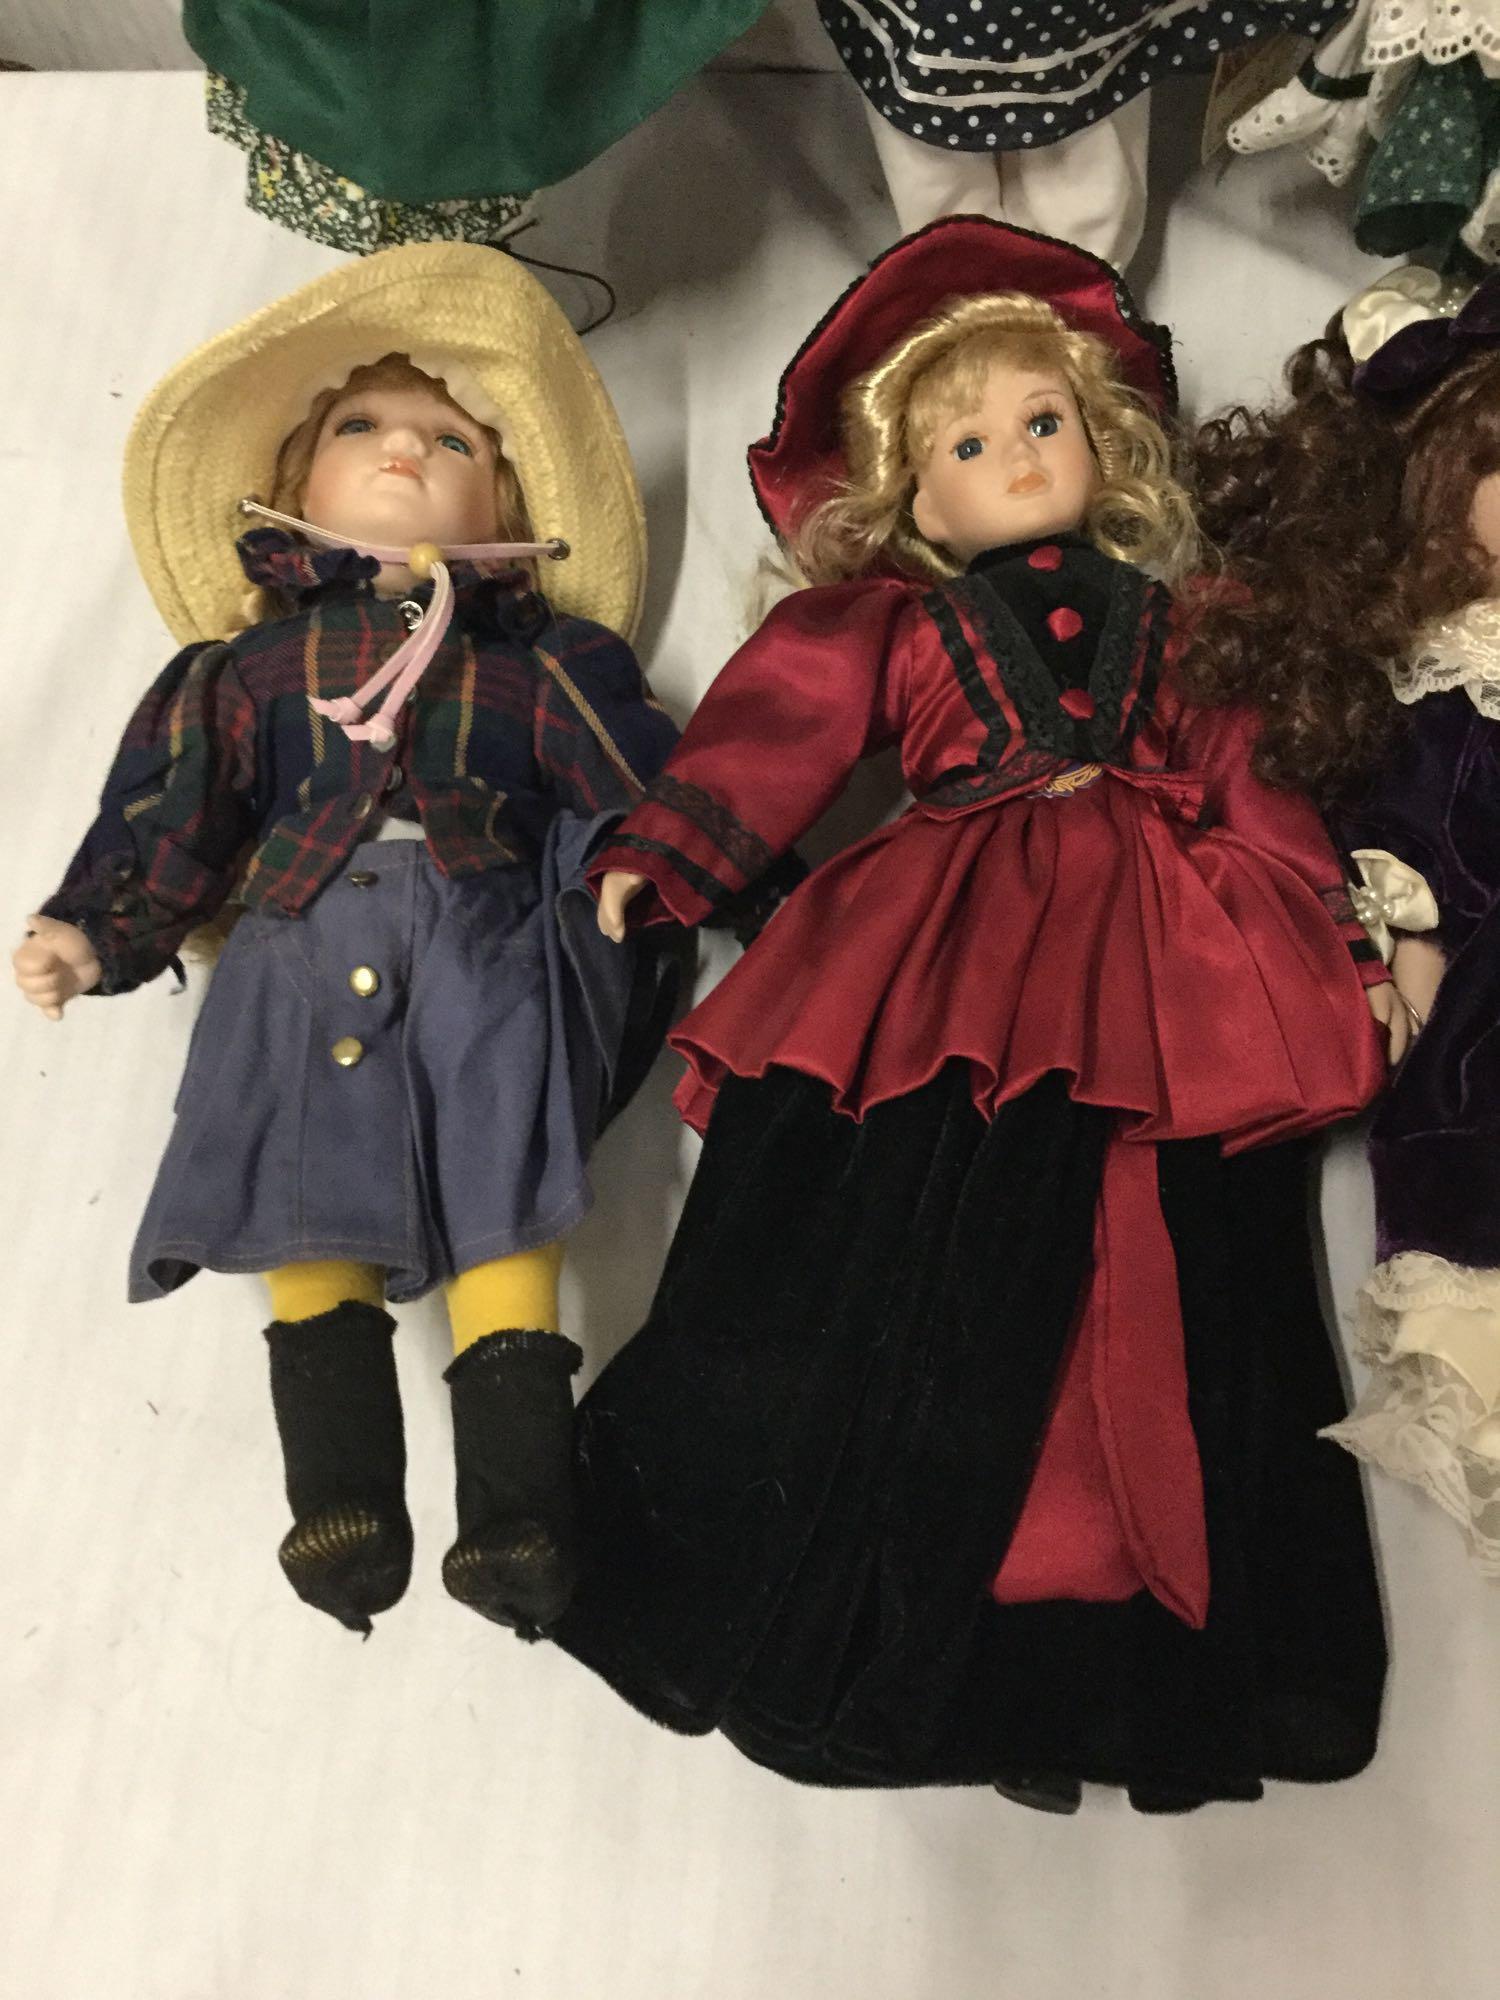 10x composite and porcelain dolls. Dynasty doll, heritage Mint and more. Largest doll measures